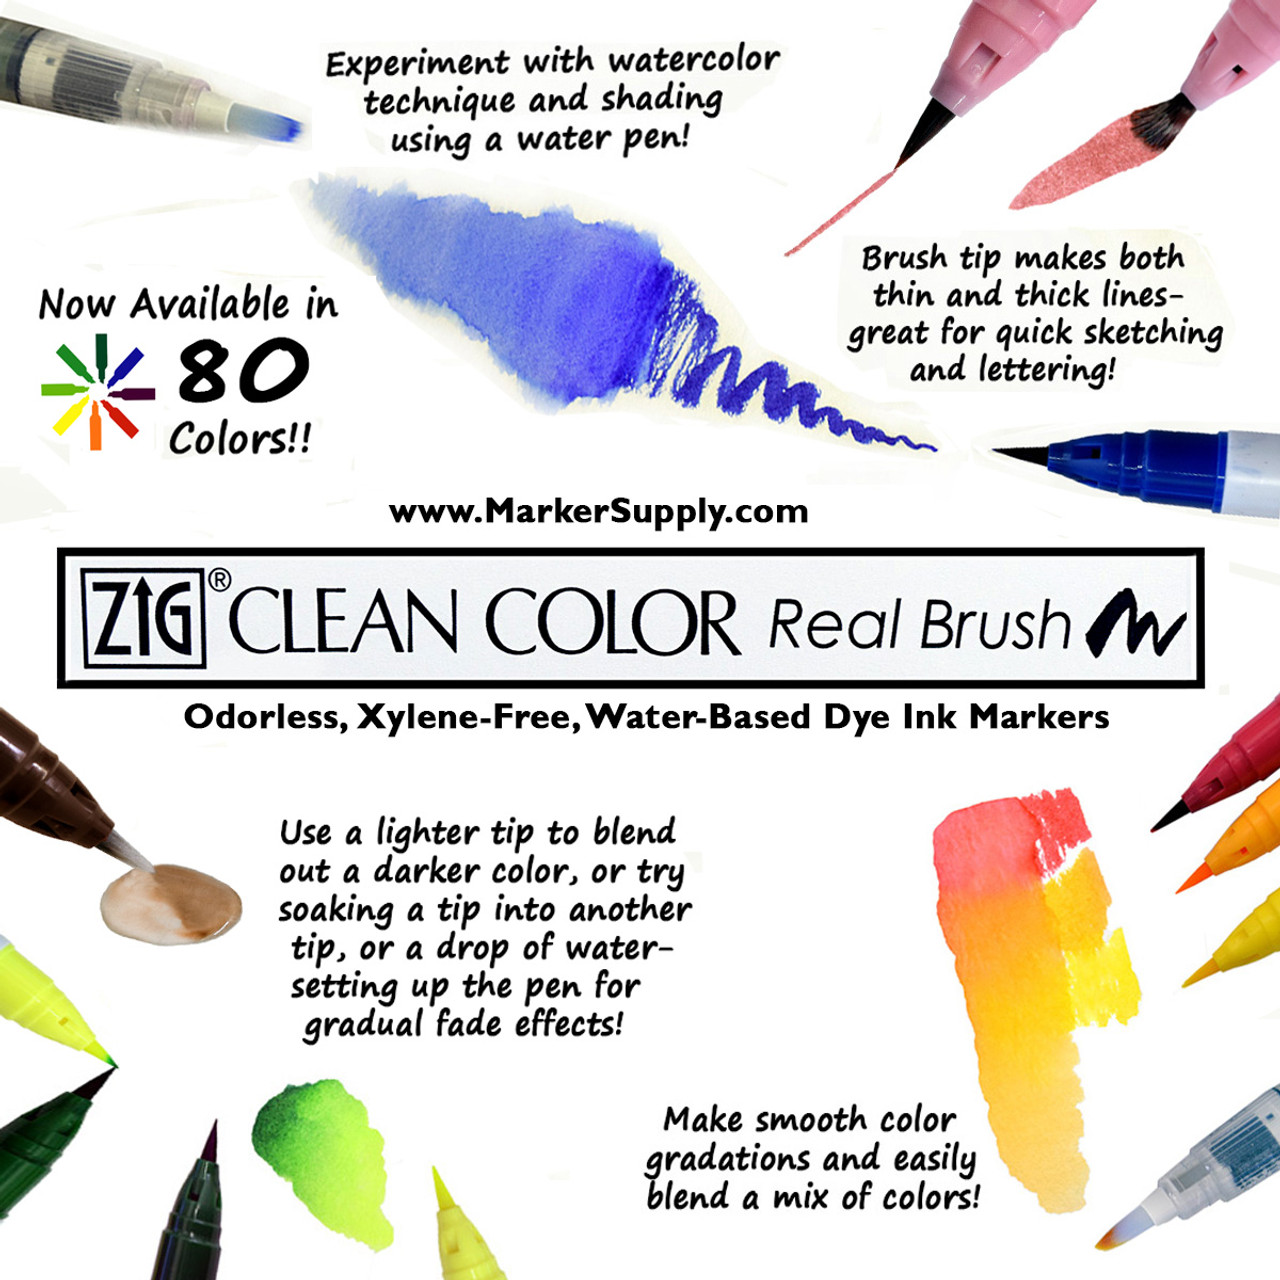 Zig Clean Color Real Brush Marker Deep Red Grape 812